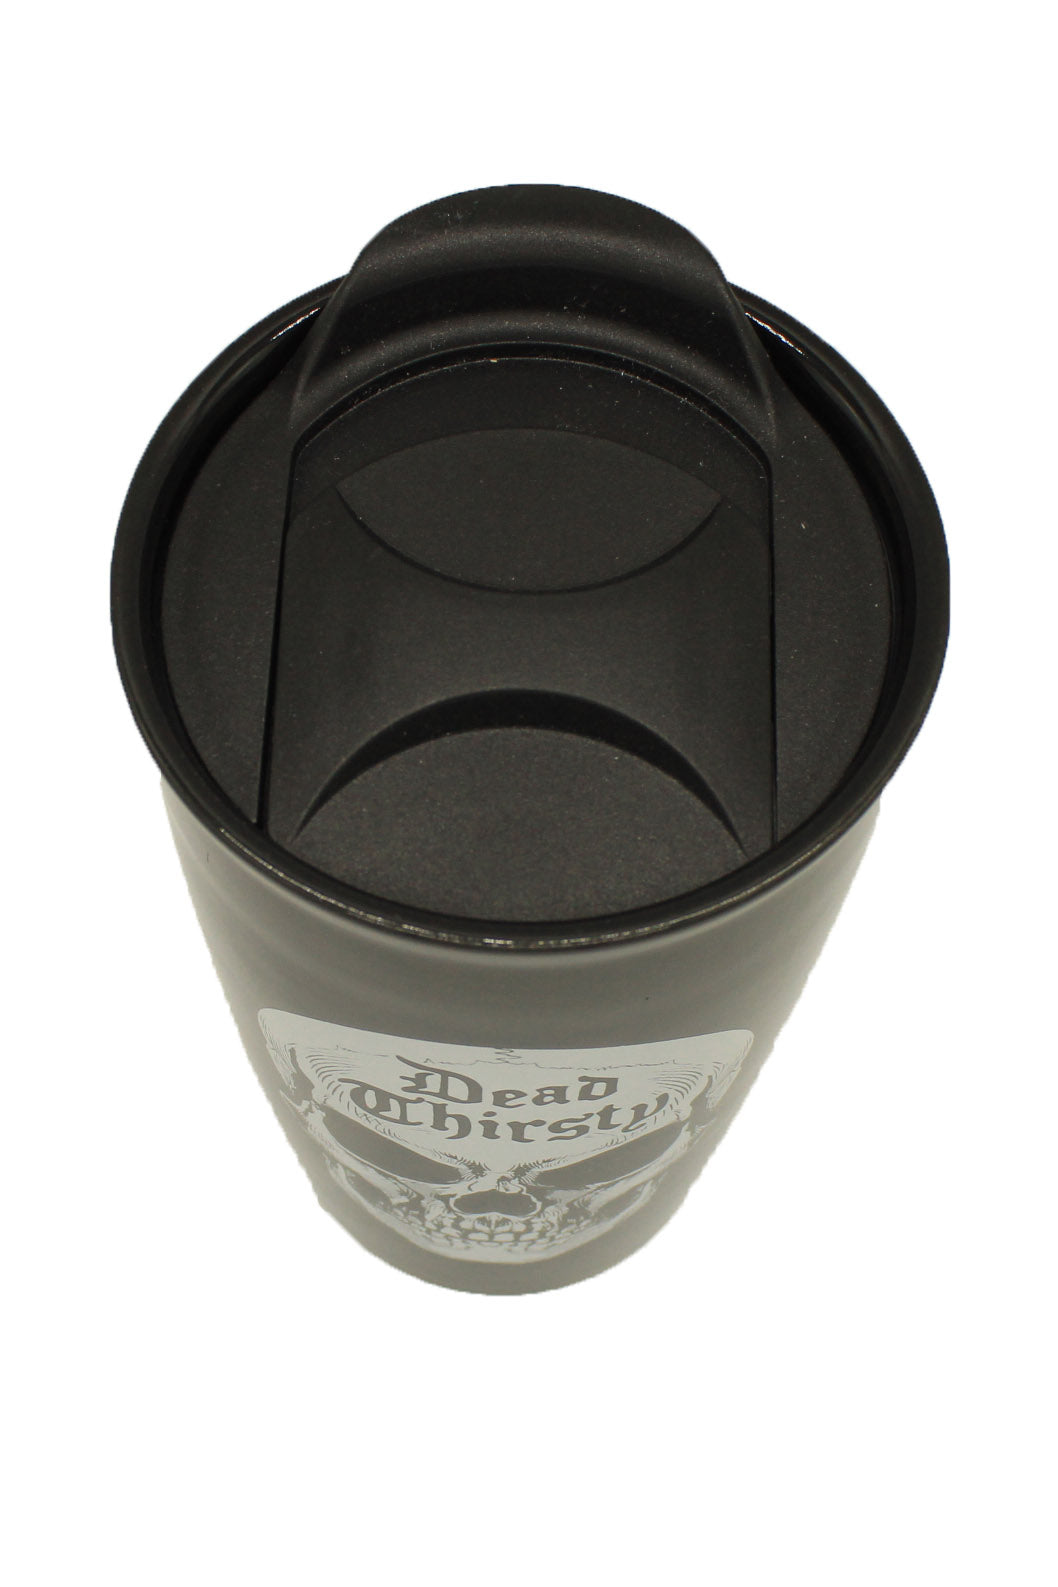 Dead Thirsty: Double Walled Travel Mug